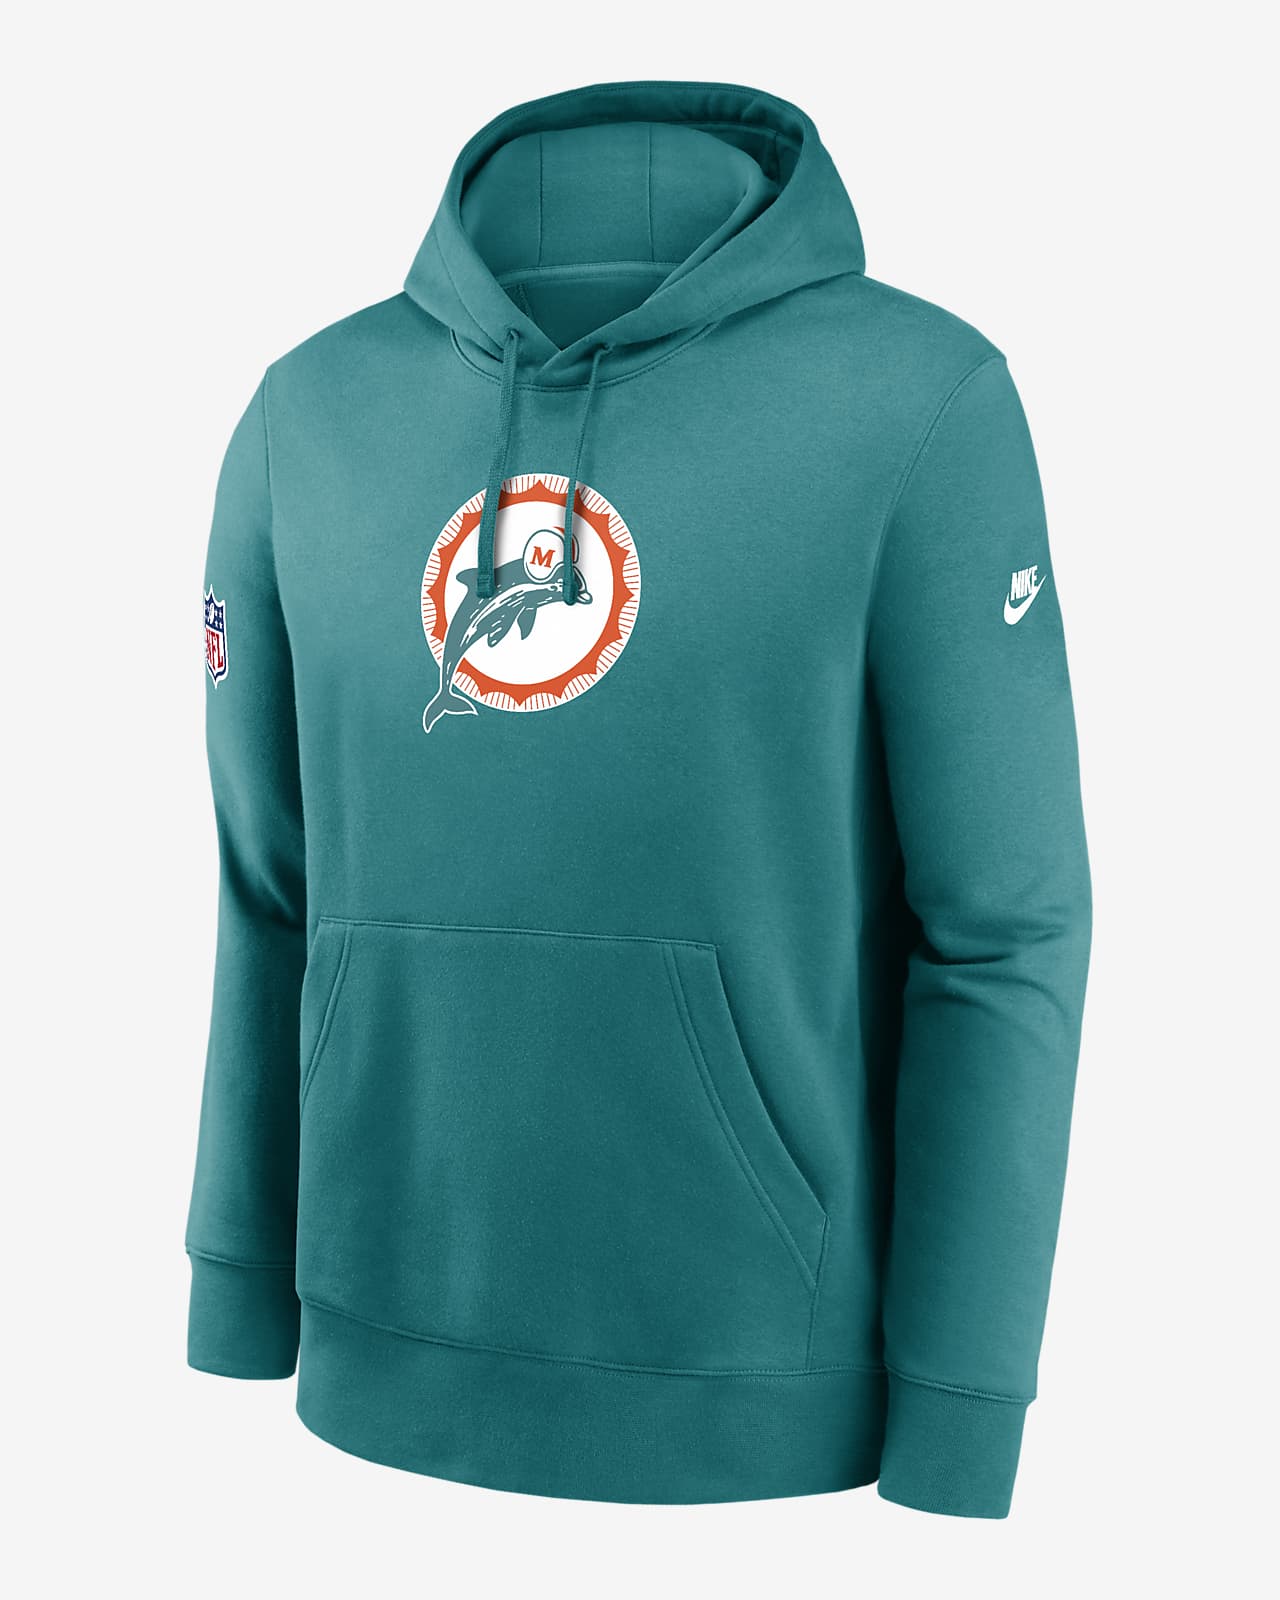 Nike Men's Club (NFL Miami Dolphins) Pullover Hoodie in Blue, Size: Small | 01AD03VV9P-FXB